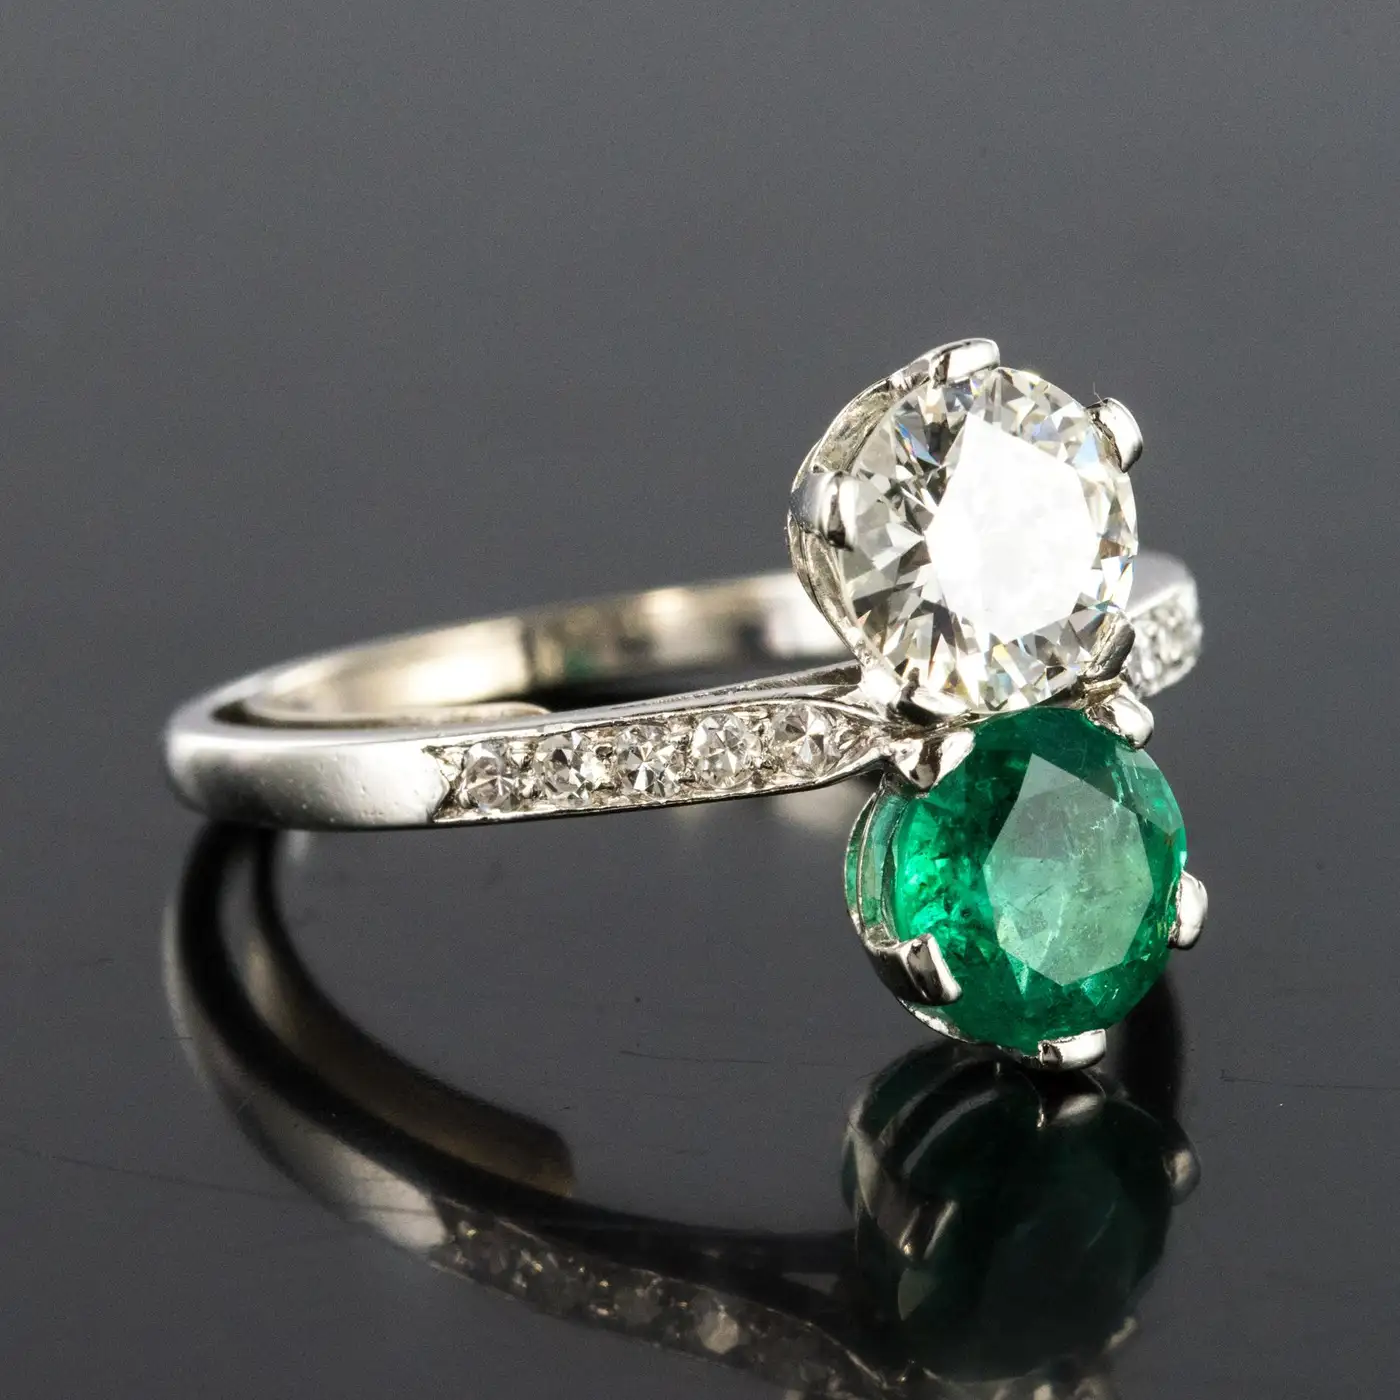 1930s-French-Platinum-Art-Deco-Emerald-Diamond-You-and-Me-Ring-4.webp